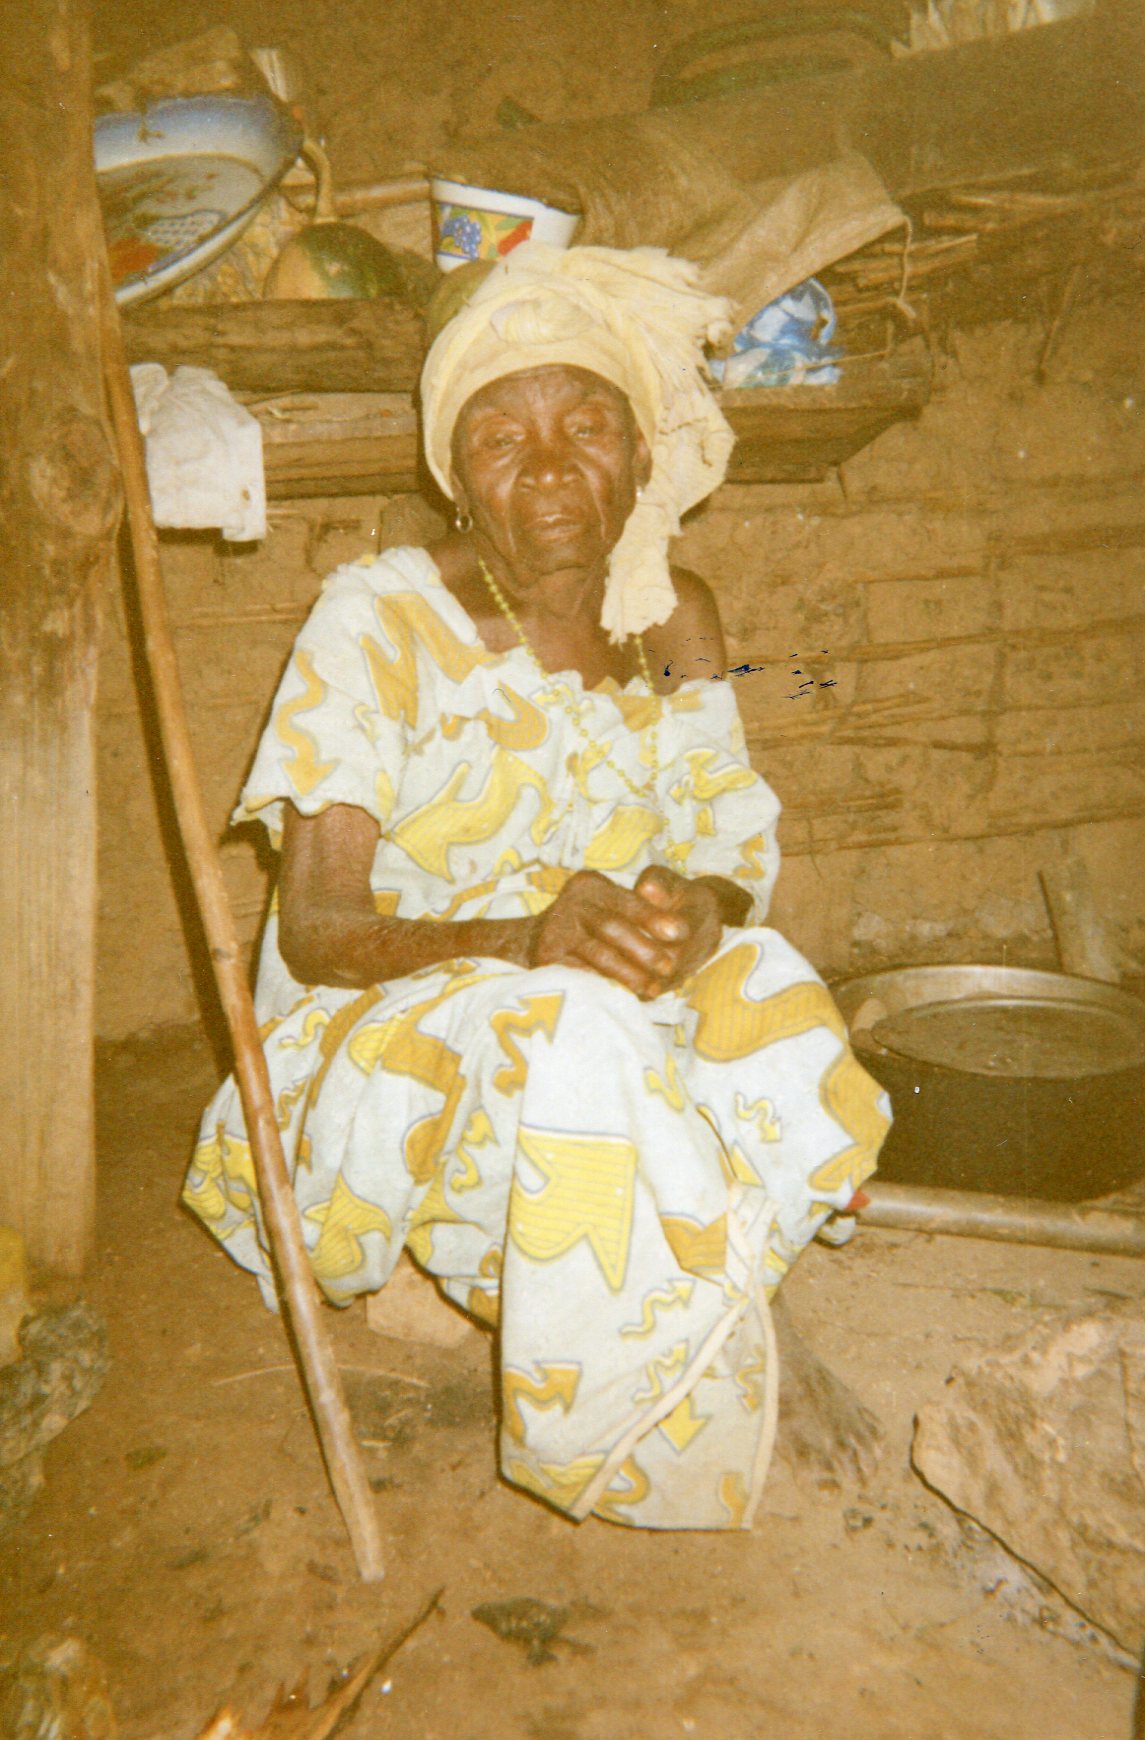  A 95-year-old widow living in her misery. 